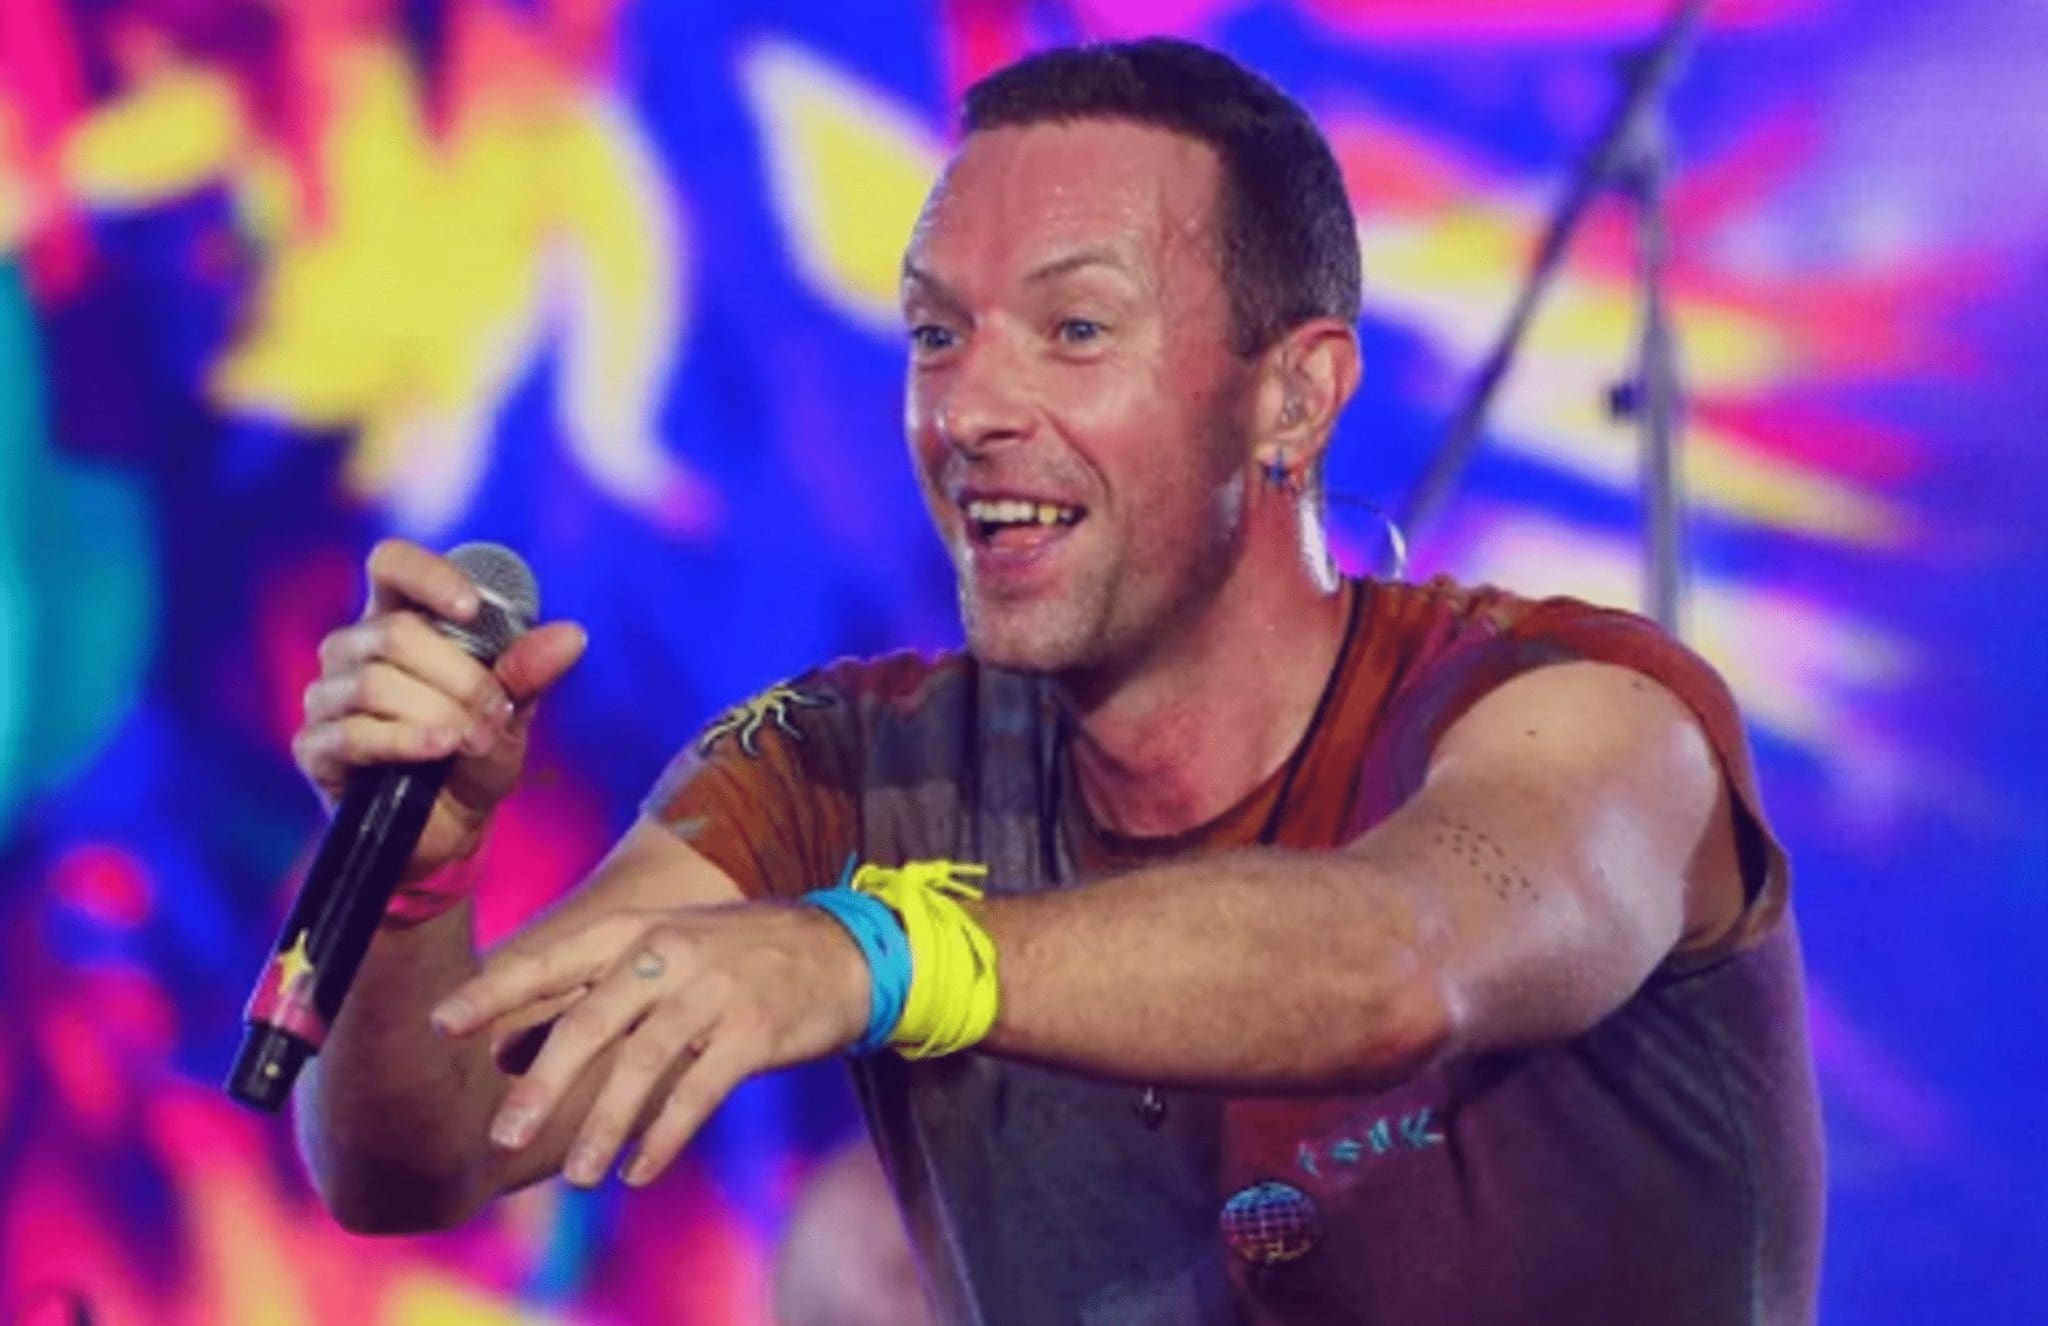 Chris Martin of Coldplay has been diagnosed with a lung infection, forcing the band to postpone their next performances.